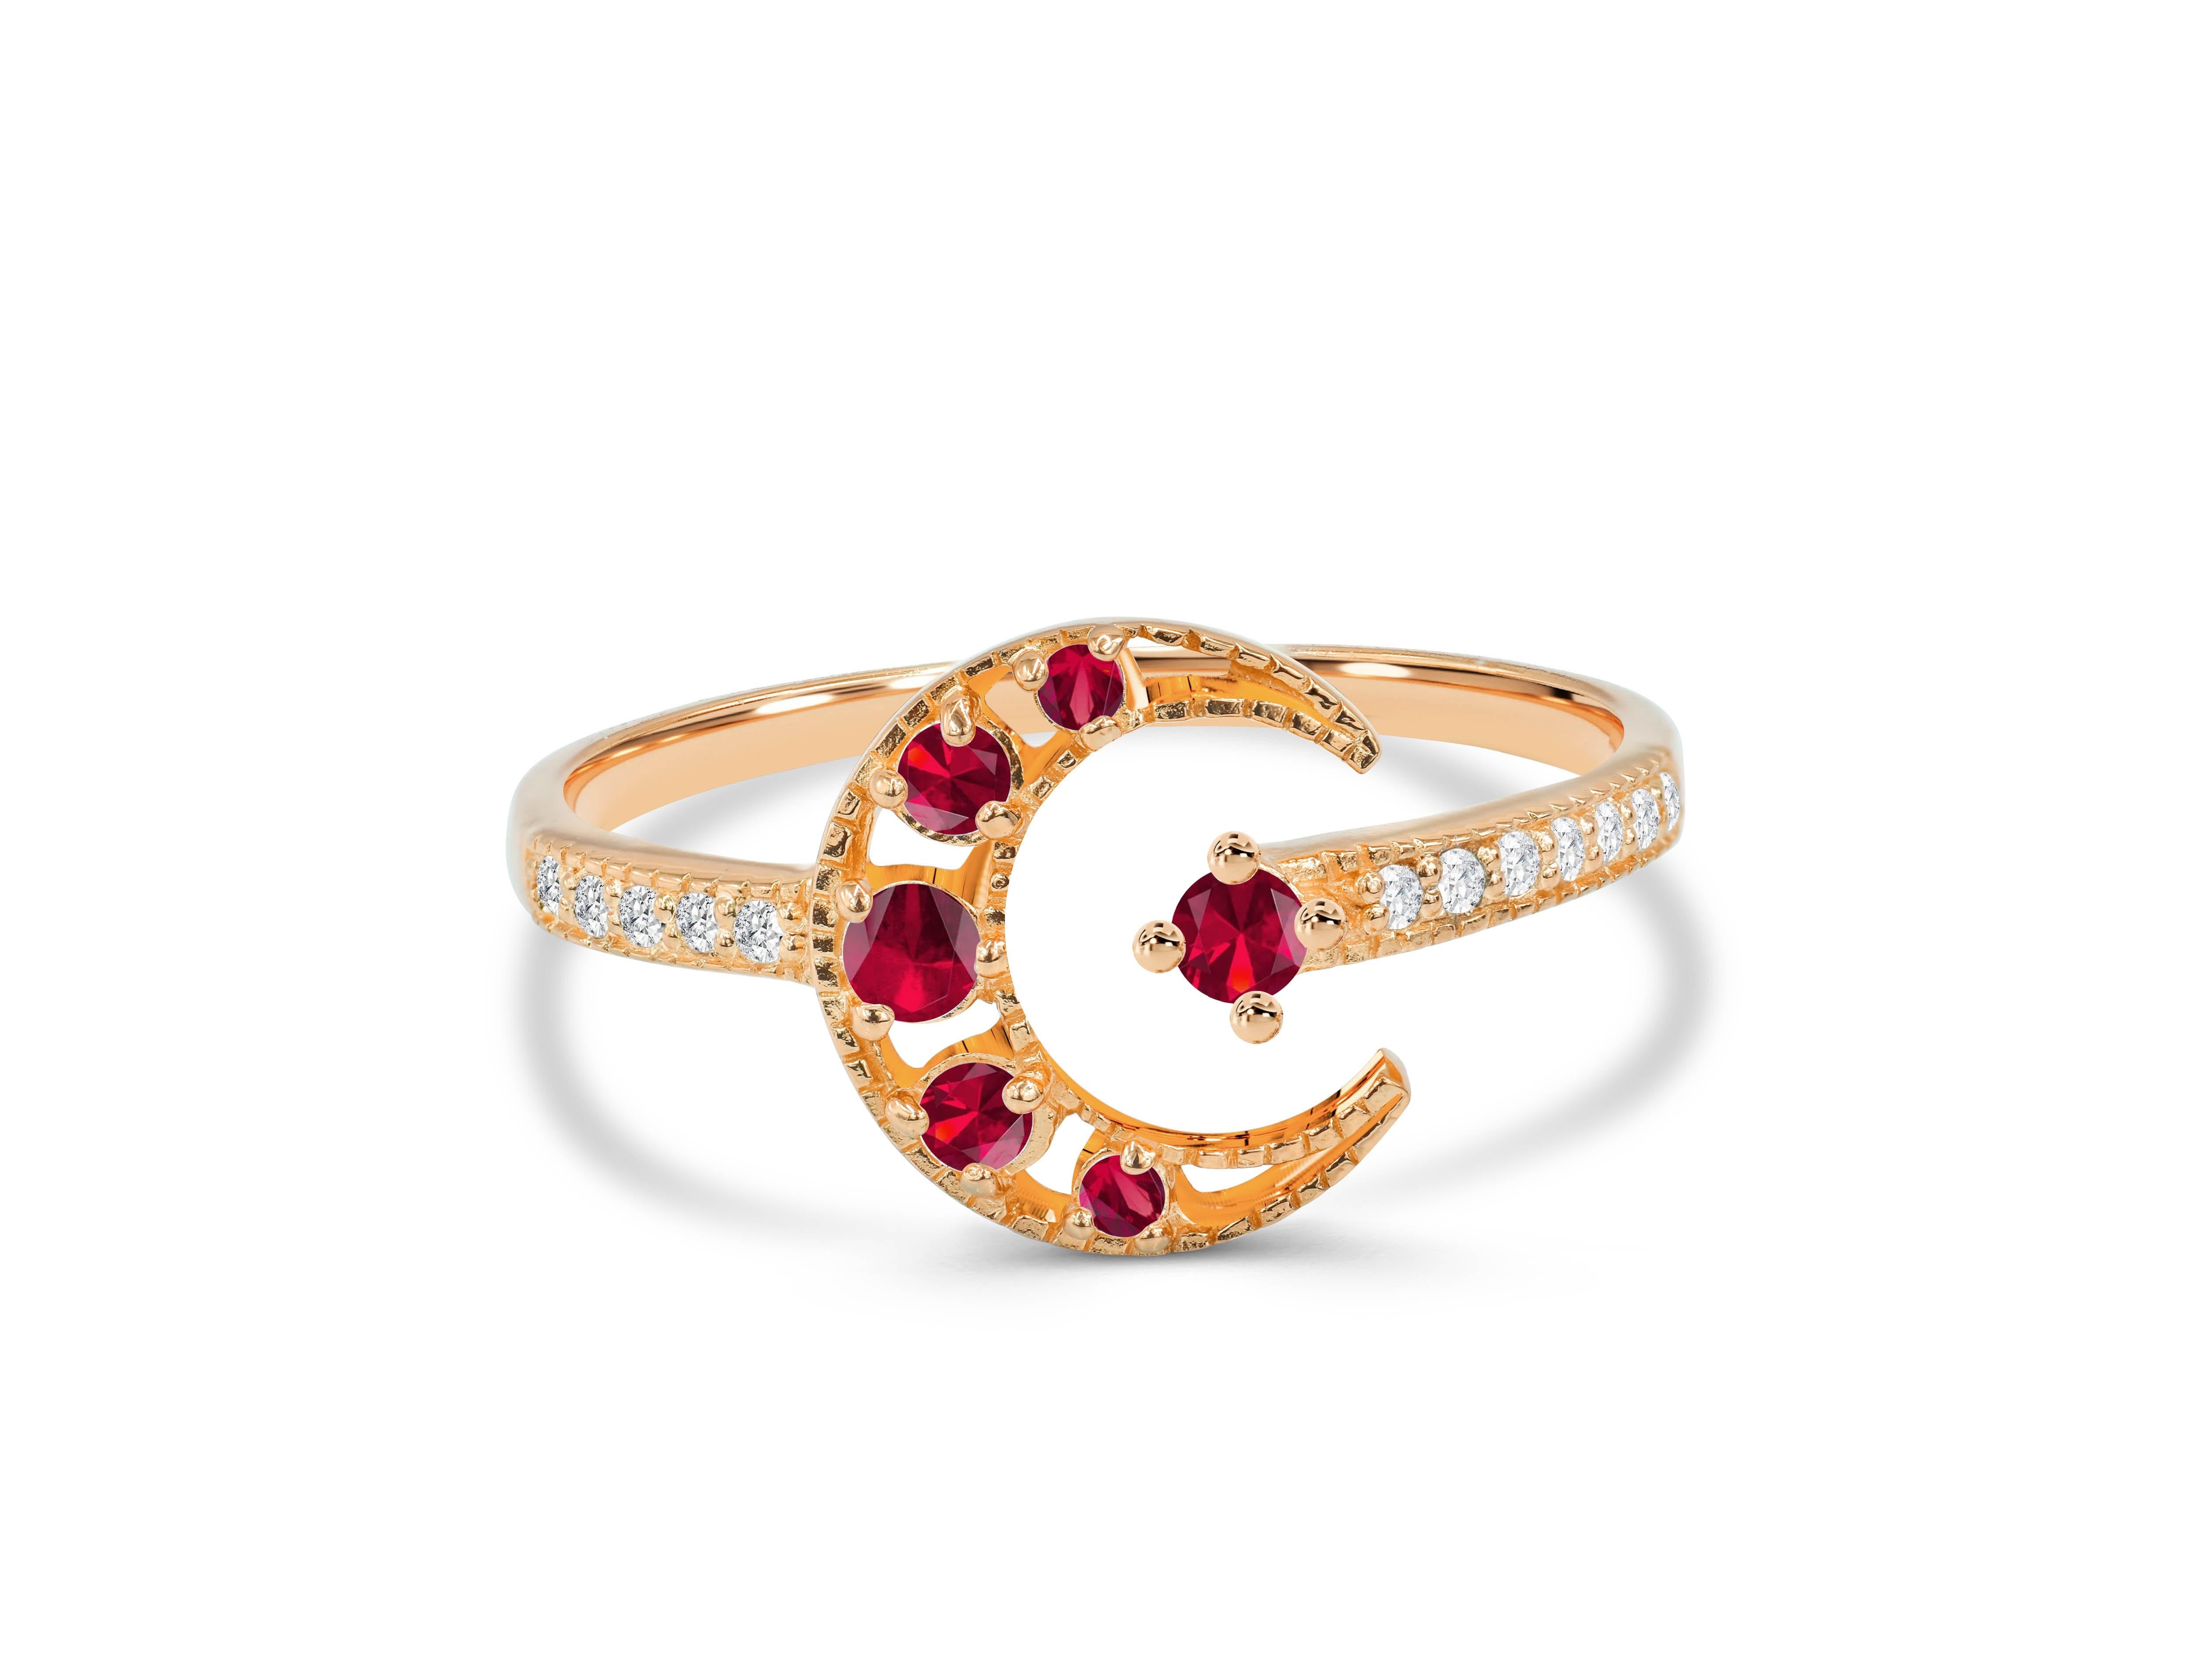 For Sale:  0.31 Ct Emerald, Ruby and Sapphire Crescent Moon Diamond Ring in 18K Gold 2